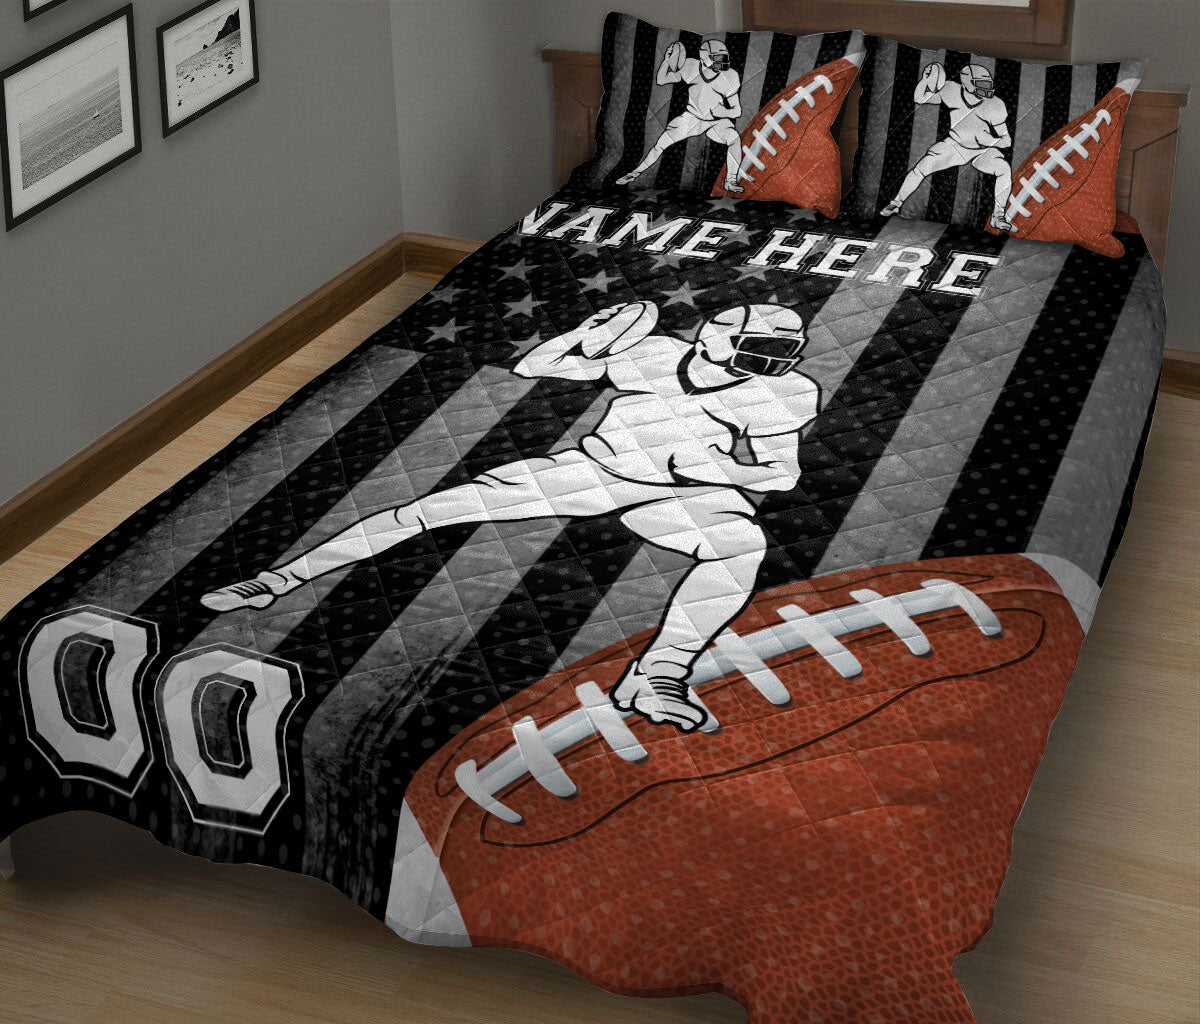 Ohaprints-Quilt-Bed-Set-Pillowcase-Football-American-Flag-Ball-Pattern-Gift-Custom-Personalized-Name-Number-Blanket-Bedspread-Bedding-665-King (90'' x 100'')